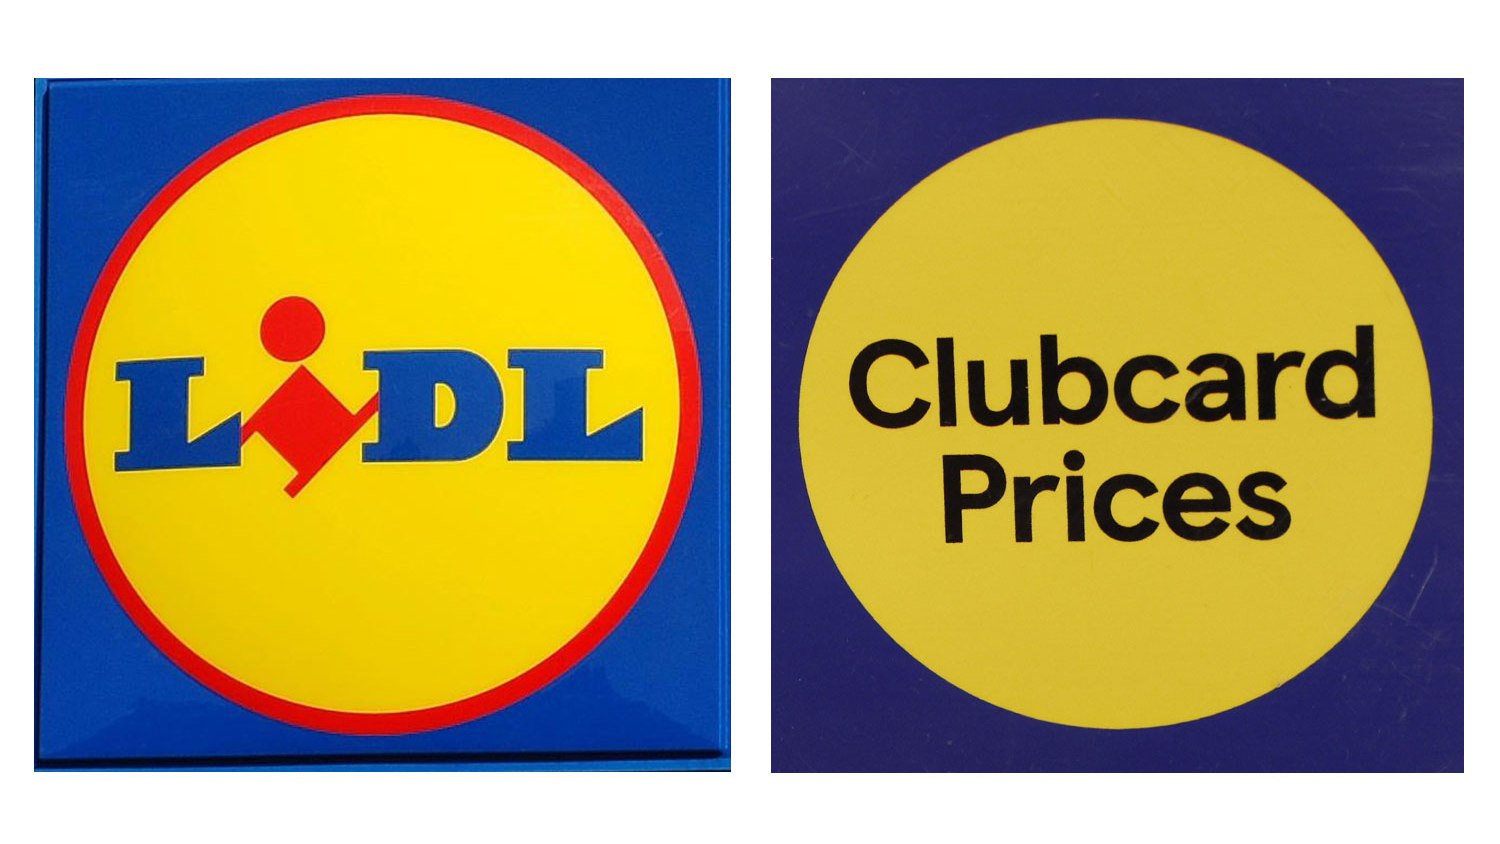 Tesco loses to Lidl in copyright row over its Clubcard logo